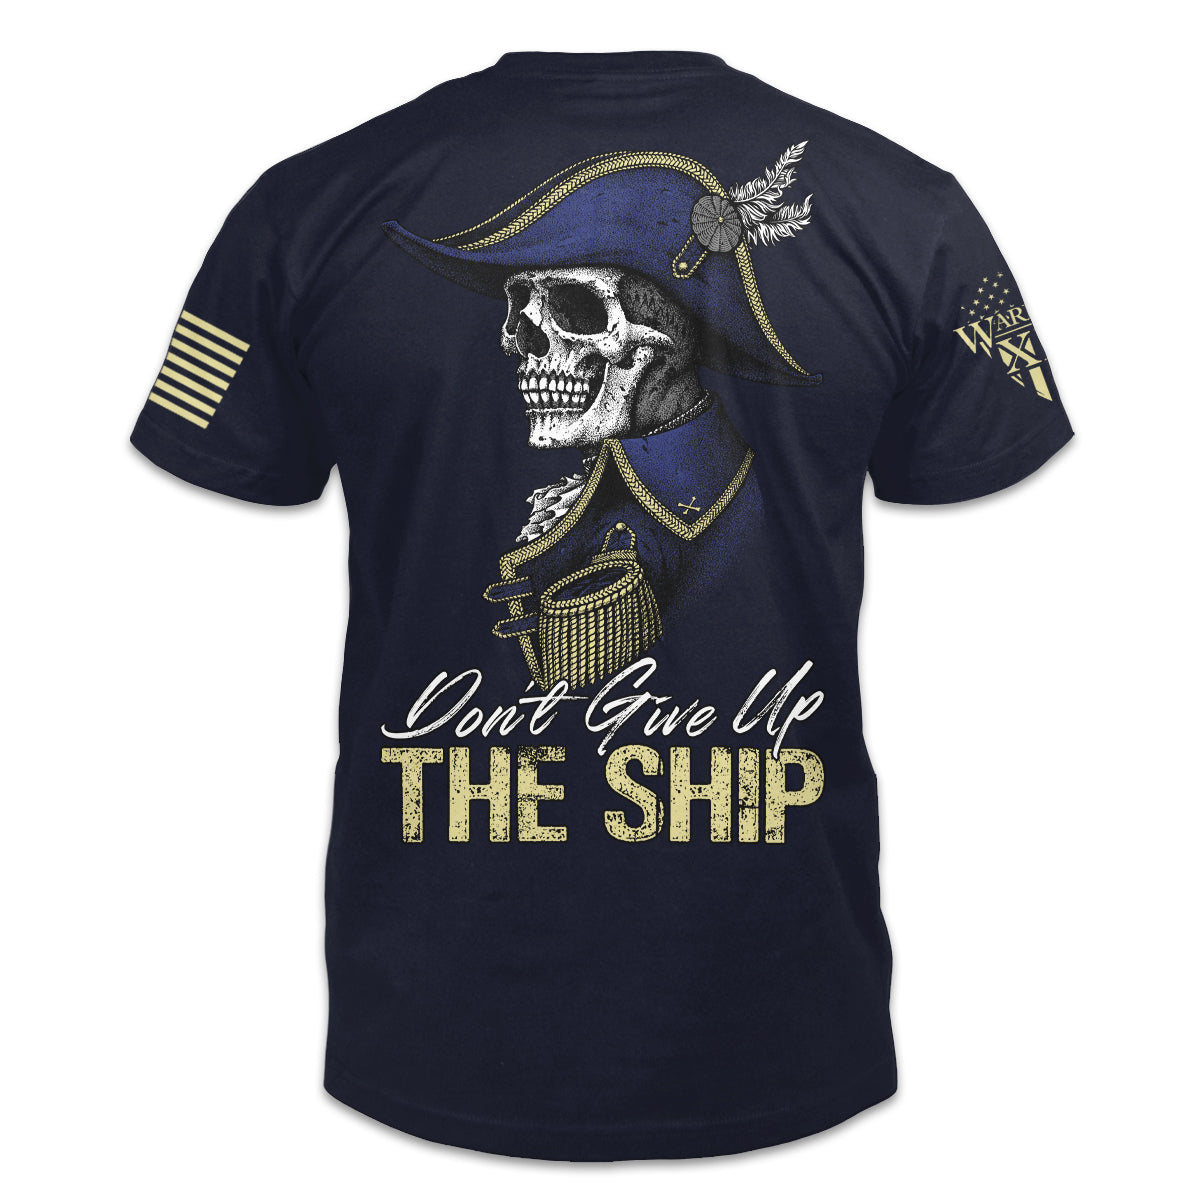 A navy blue t-shirt with the words "Don't give up the ship" and a skeleton of Captain James Lawrence printed on the back of the shirt.